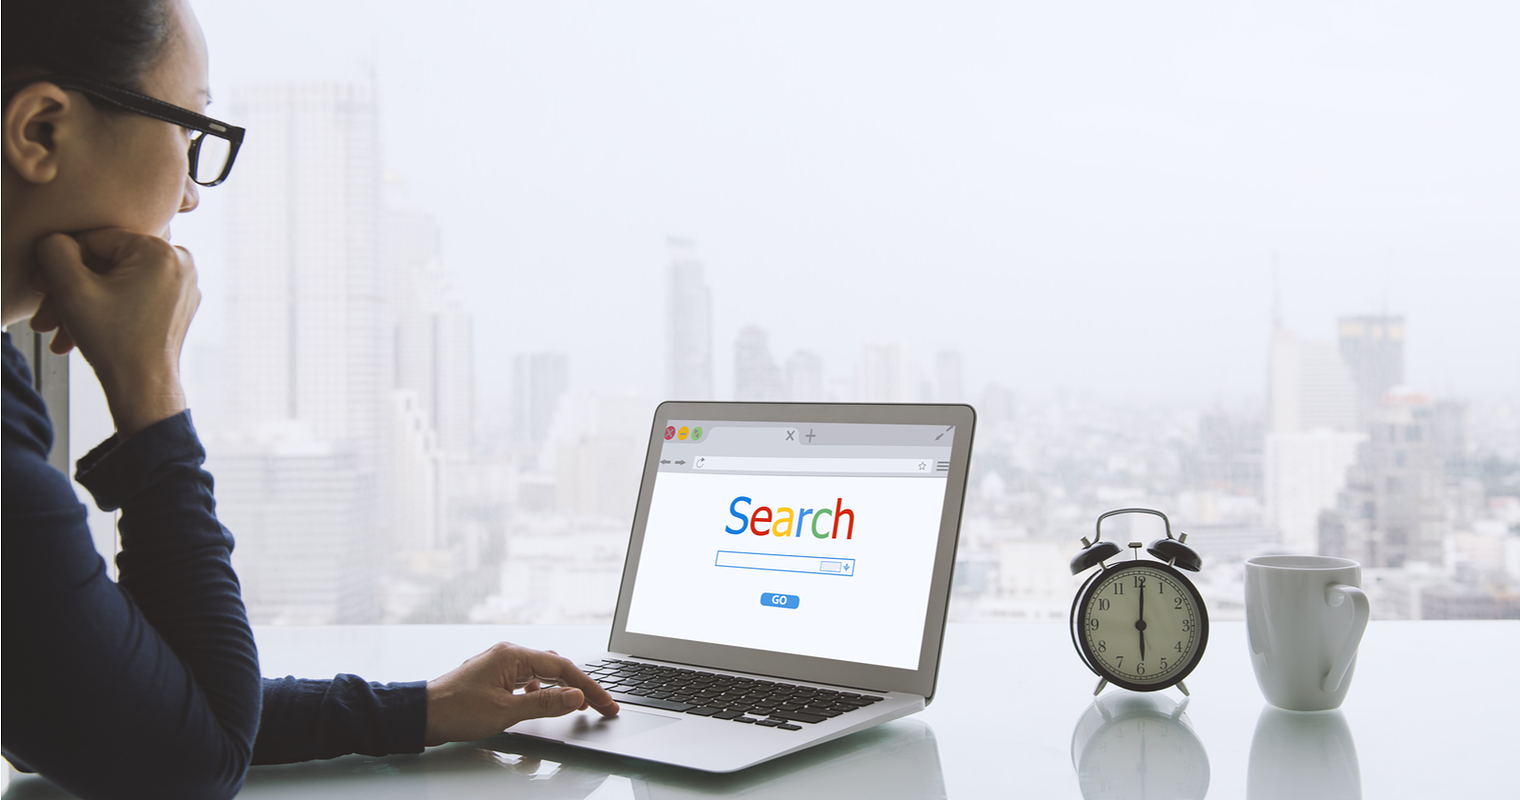 What Is the Best Search Alternative to Google? [POLL]